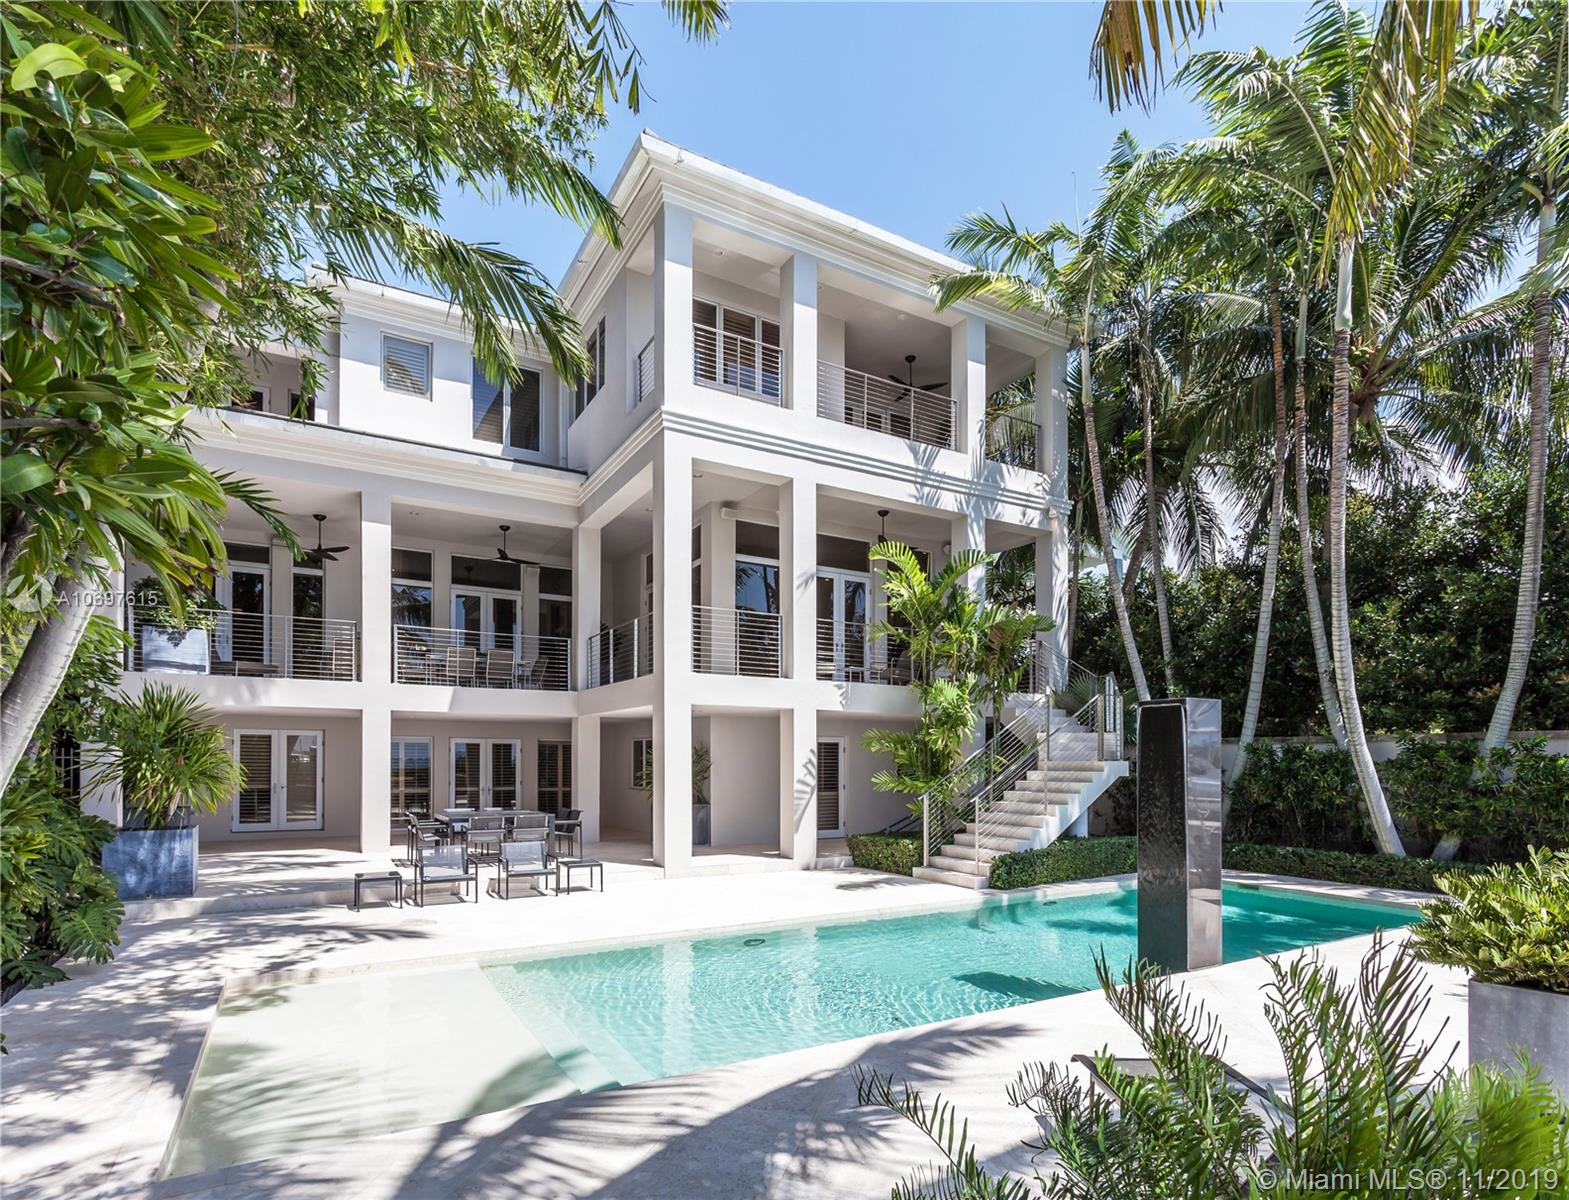 Sophisticated living in Coconut Grove’s blissfully tranquil, waterfront gated community of Hughes Cove. Breathtaking inside-outside living spaces with sleek design and luxurious finishes, which are enhanced by heavenly views of the bay and its sparkling water. The 3-story residence’s main floor comes with an office, living room with wet bar, custom marble countertops, kitchen with large island and state-of-the-art appliances. Custom staircase leads to the upper floor, where sliding glass doors open to the spacious terrace off the master suite. Waterfront patio offers an array of dining and lounging options, a delightful swimming pool with waterfall and sun deck. Residence also features an elevator that goes to all floors, and spacious 7-car garage for car enthusiasts.